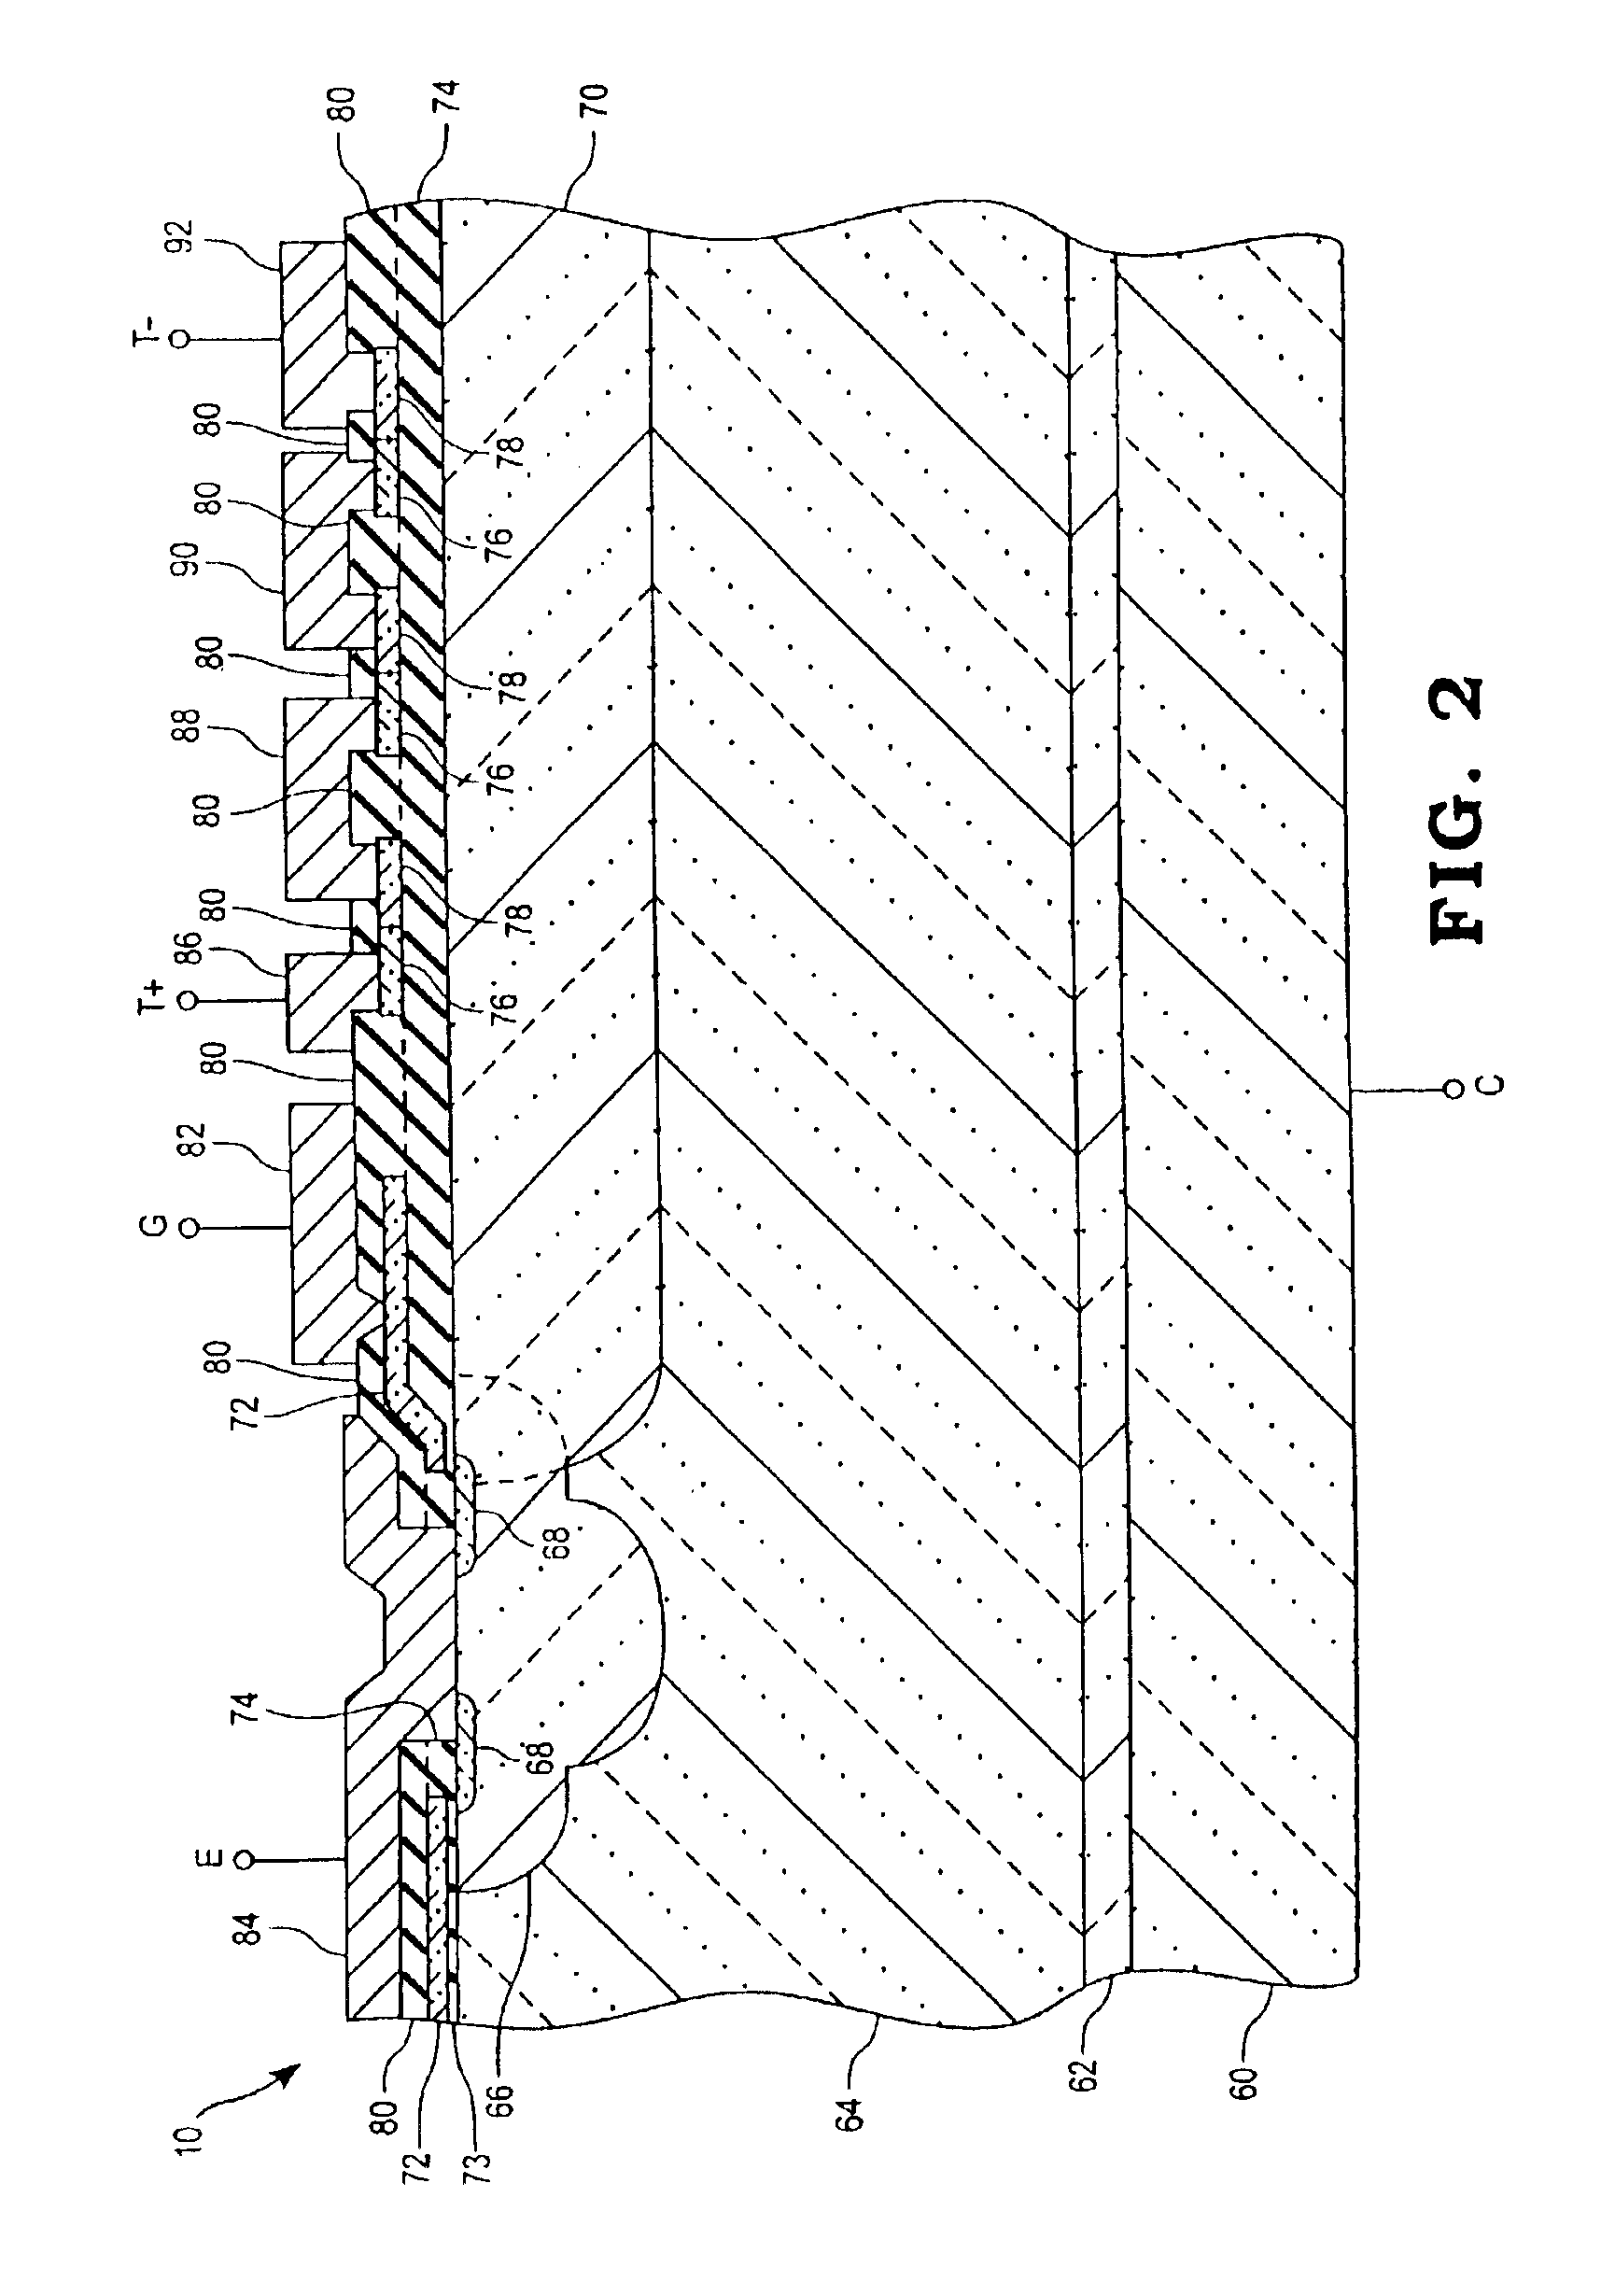 Integrated circuit including semiconductor power device and electrically isolated thermal sensor